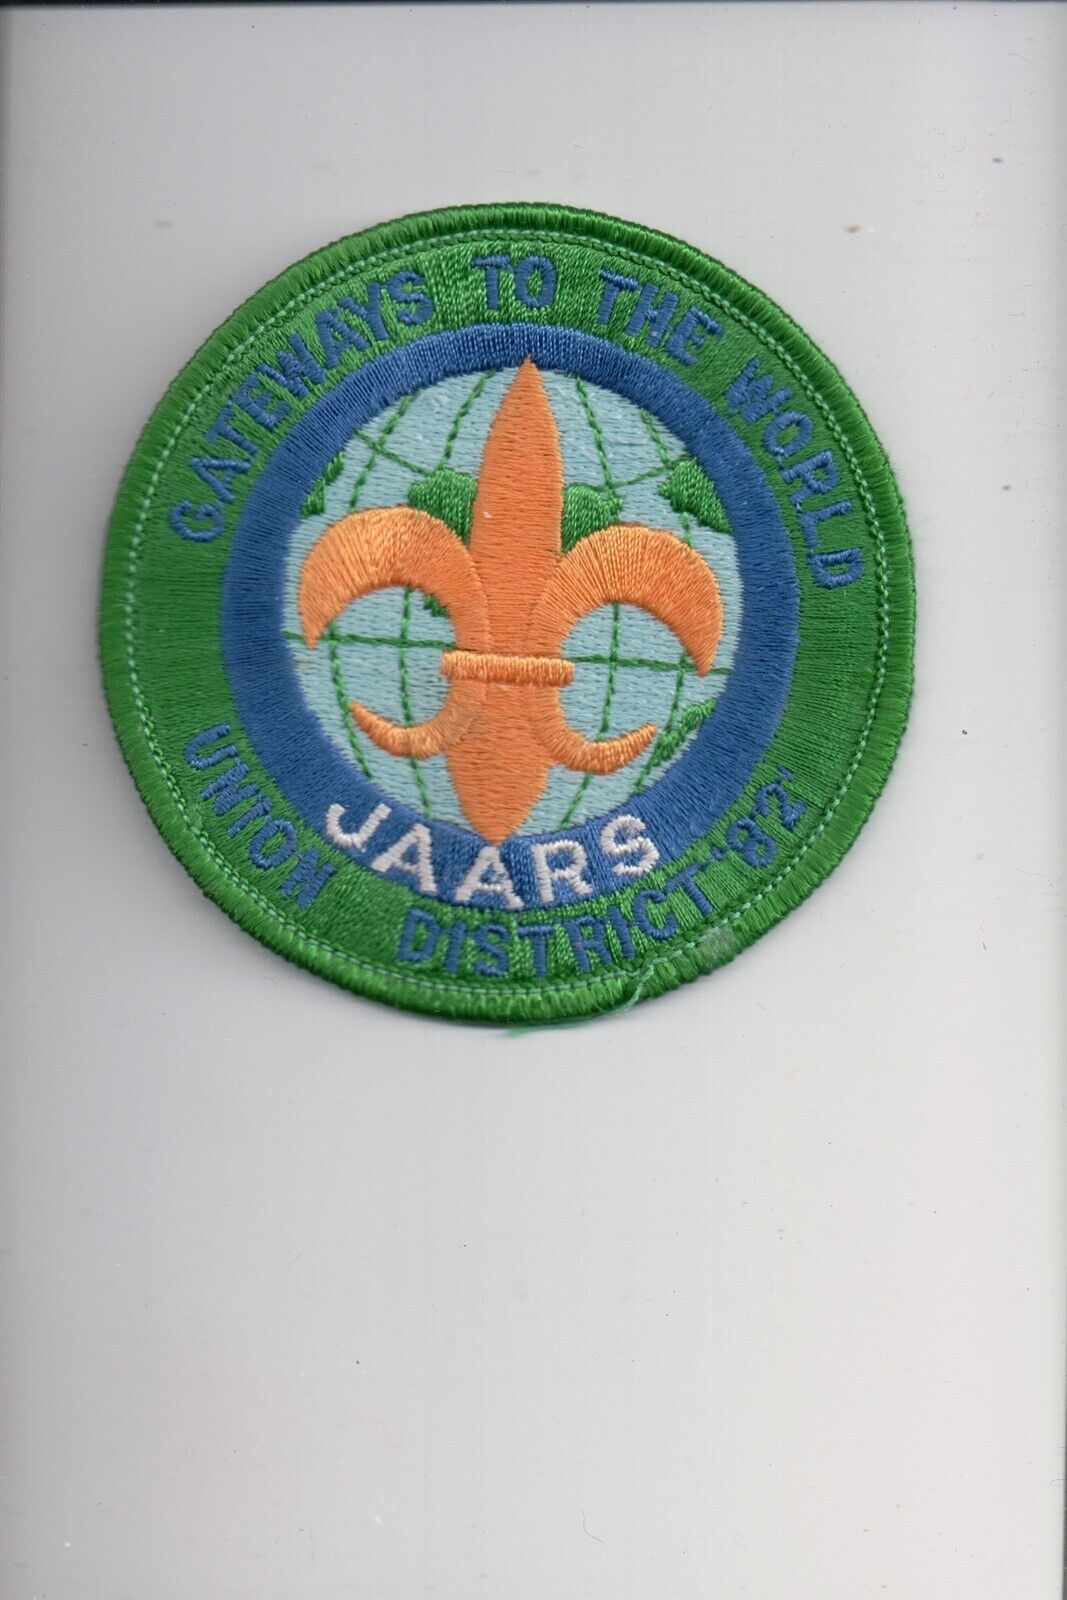 1982 Union District Gateways To The World patch